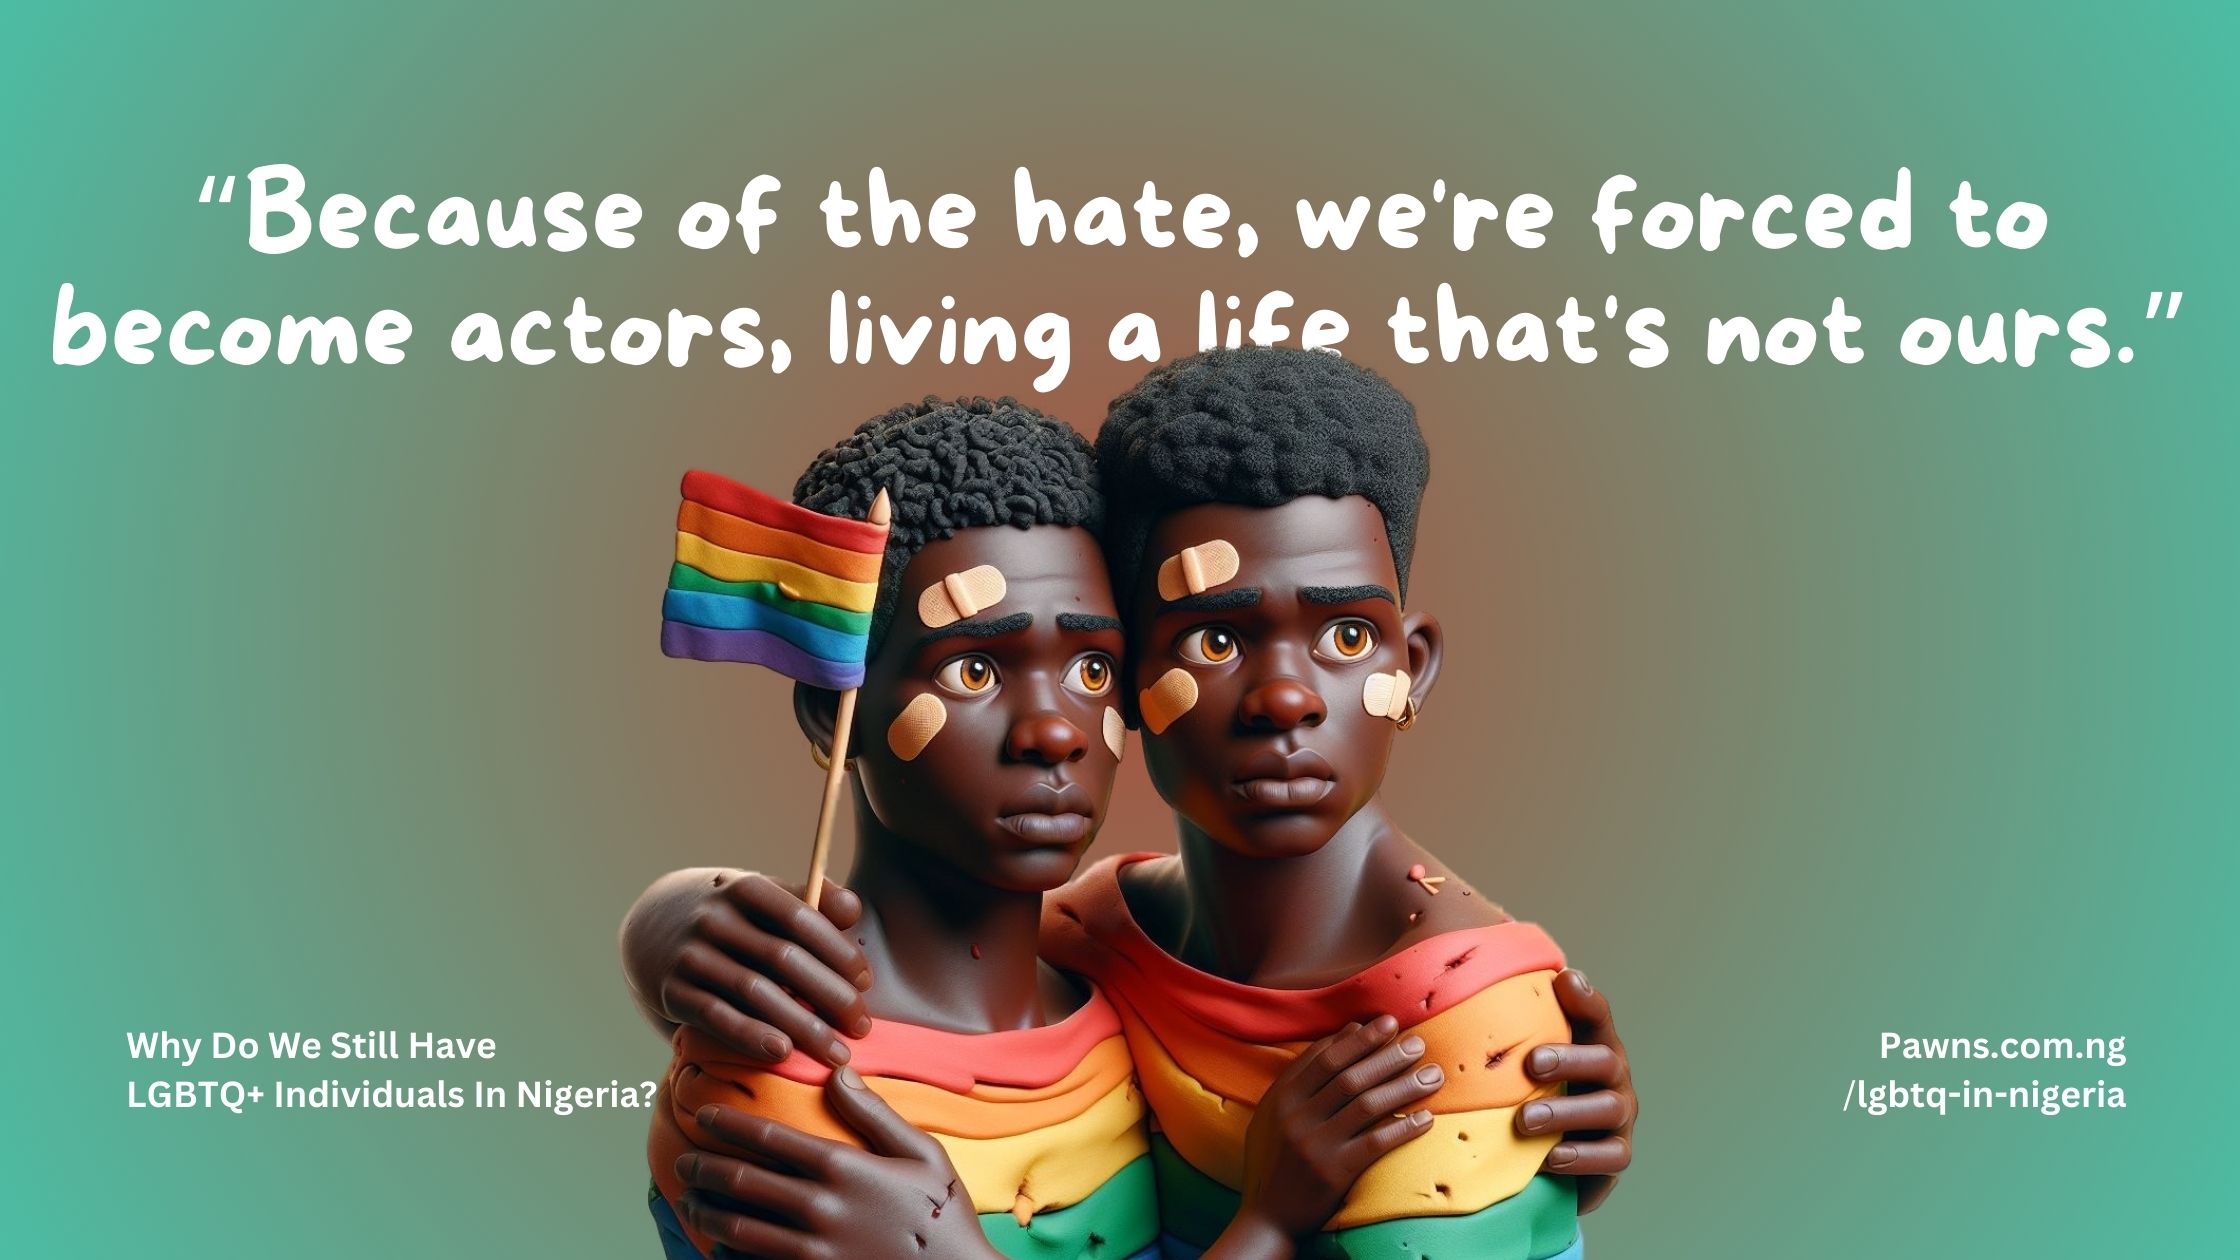 Because of the hate, we're forced to become actors, living a life that's not ours. Why Do We Still Have LGBTQ+ Individuals In Nigeria